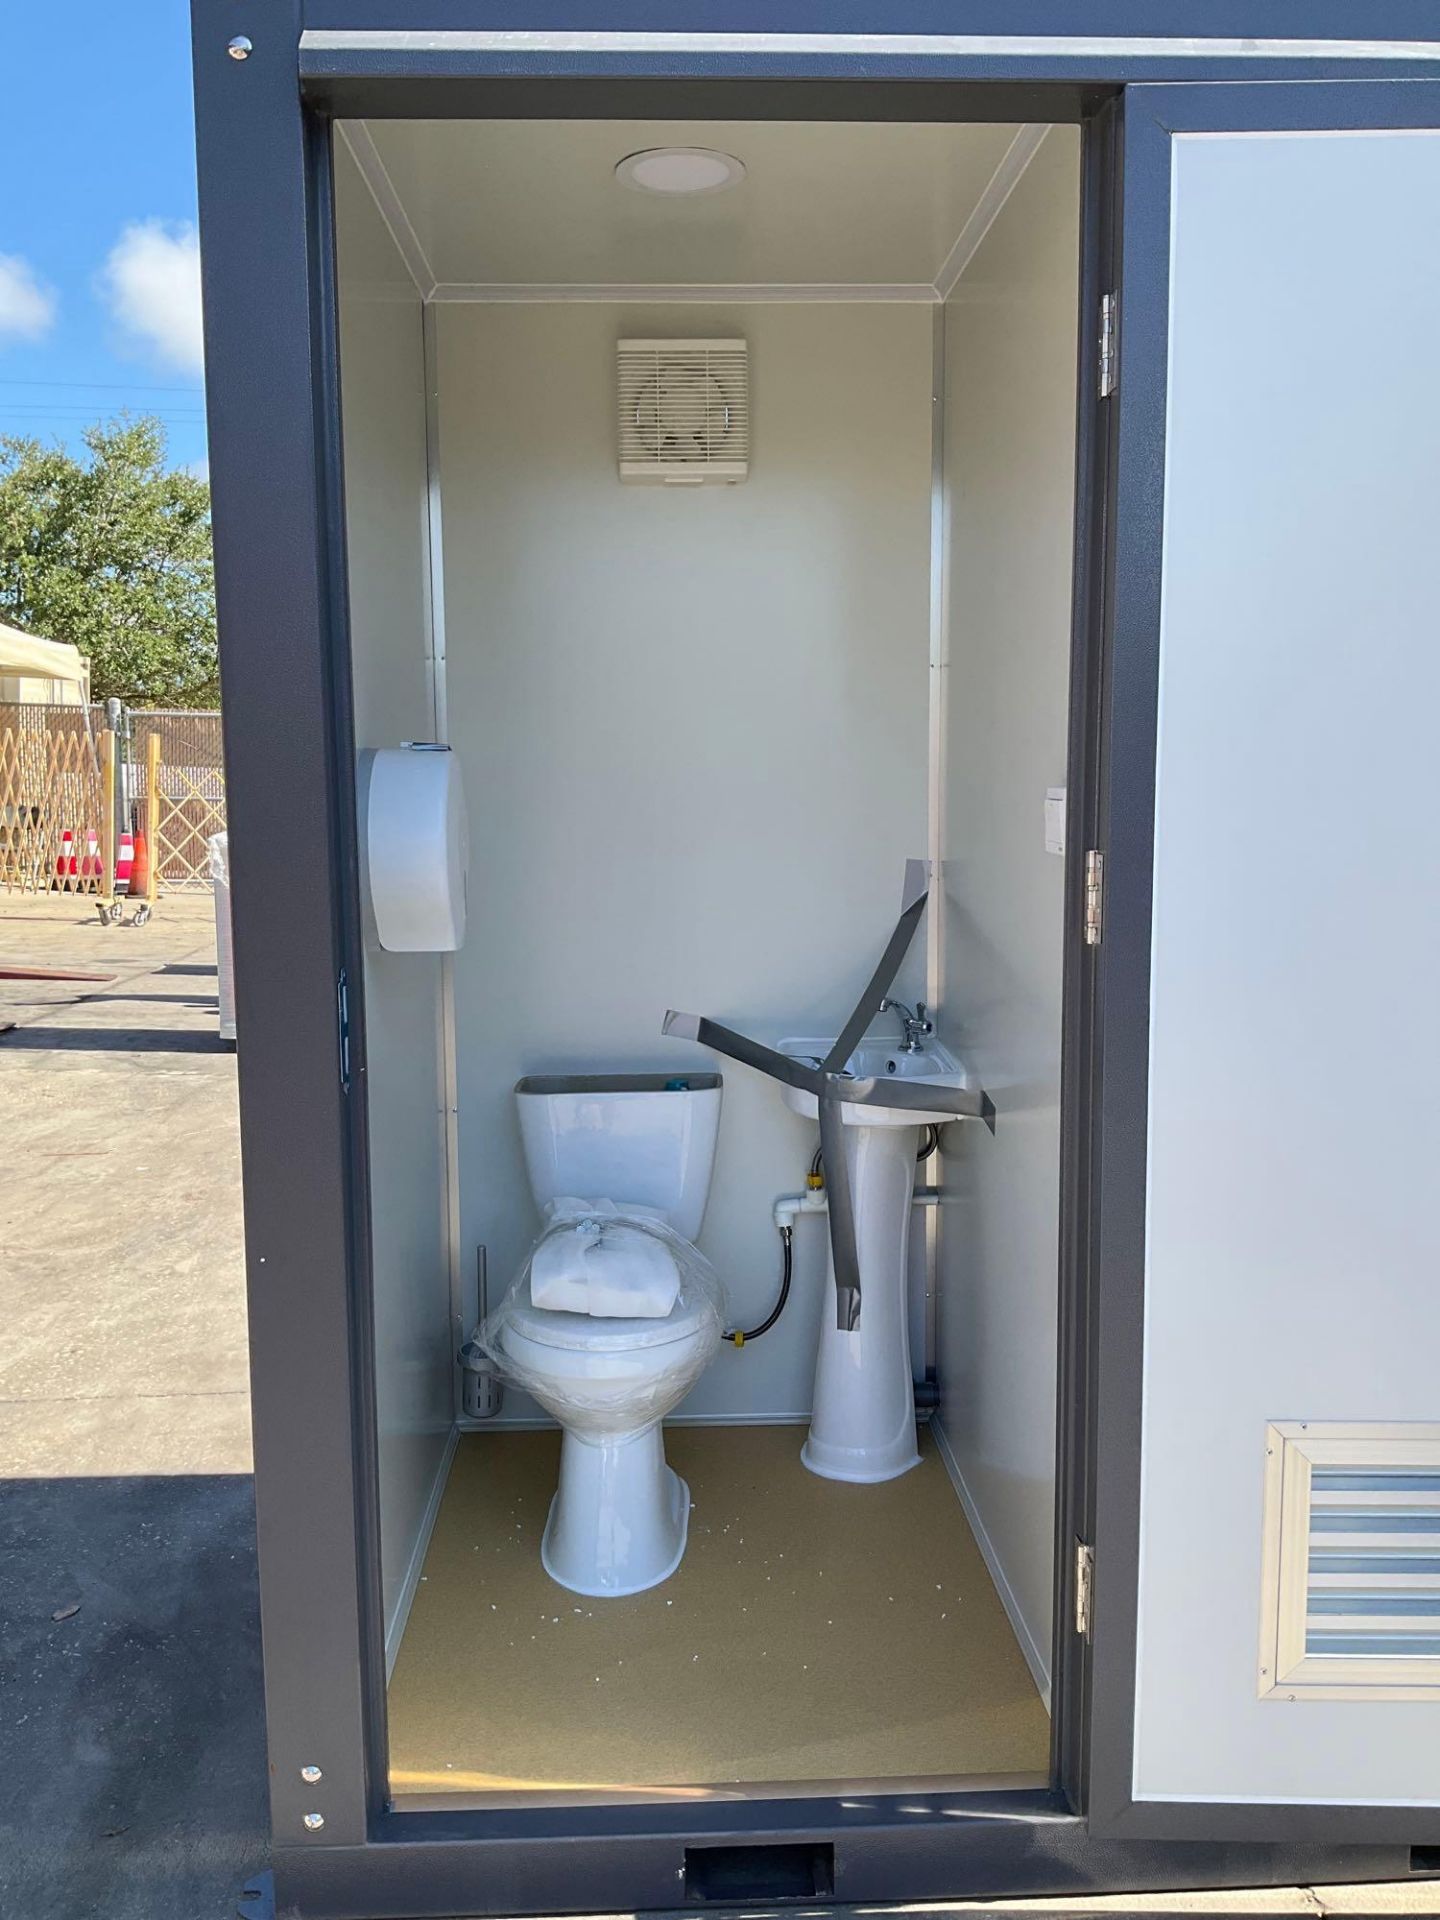 UNUSED PORTABLE DOUBLE BATHROOM UNIT, 2 STALLS, ELECTRIC & PLUMBING HOOK UP WITH EXTERIOR PLUMBING C - Image 14 of 16